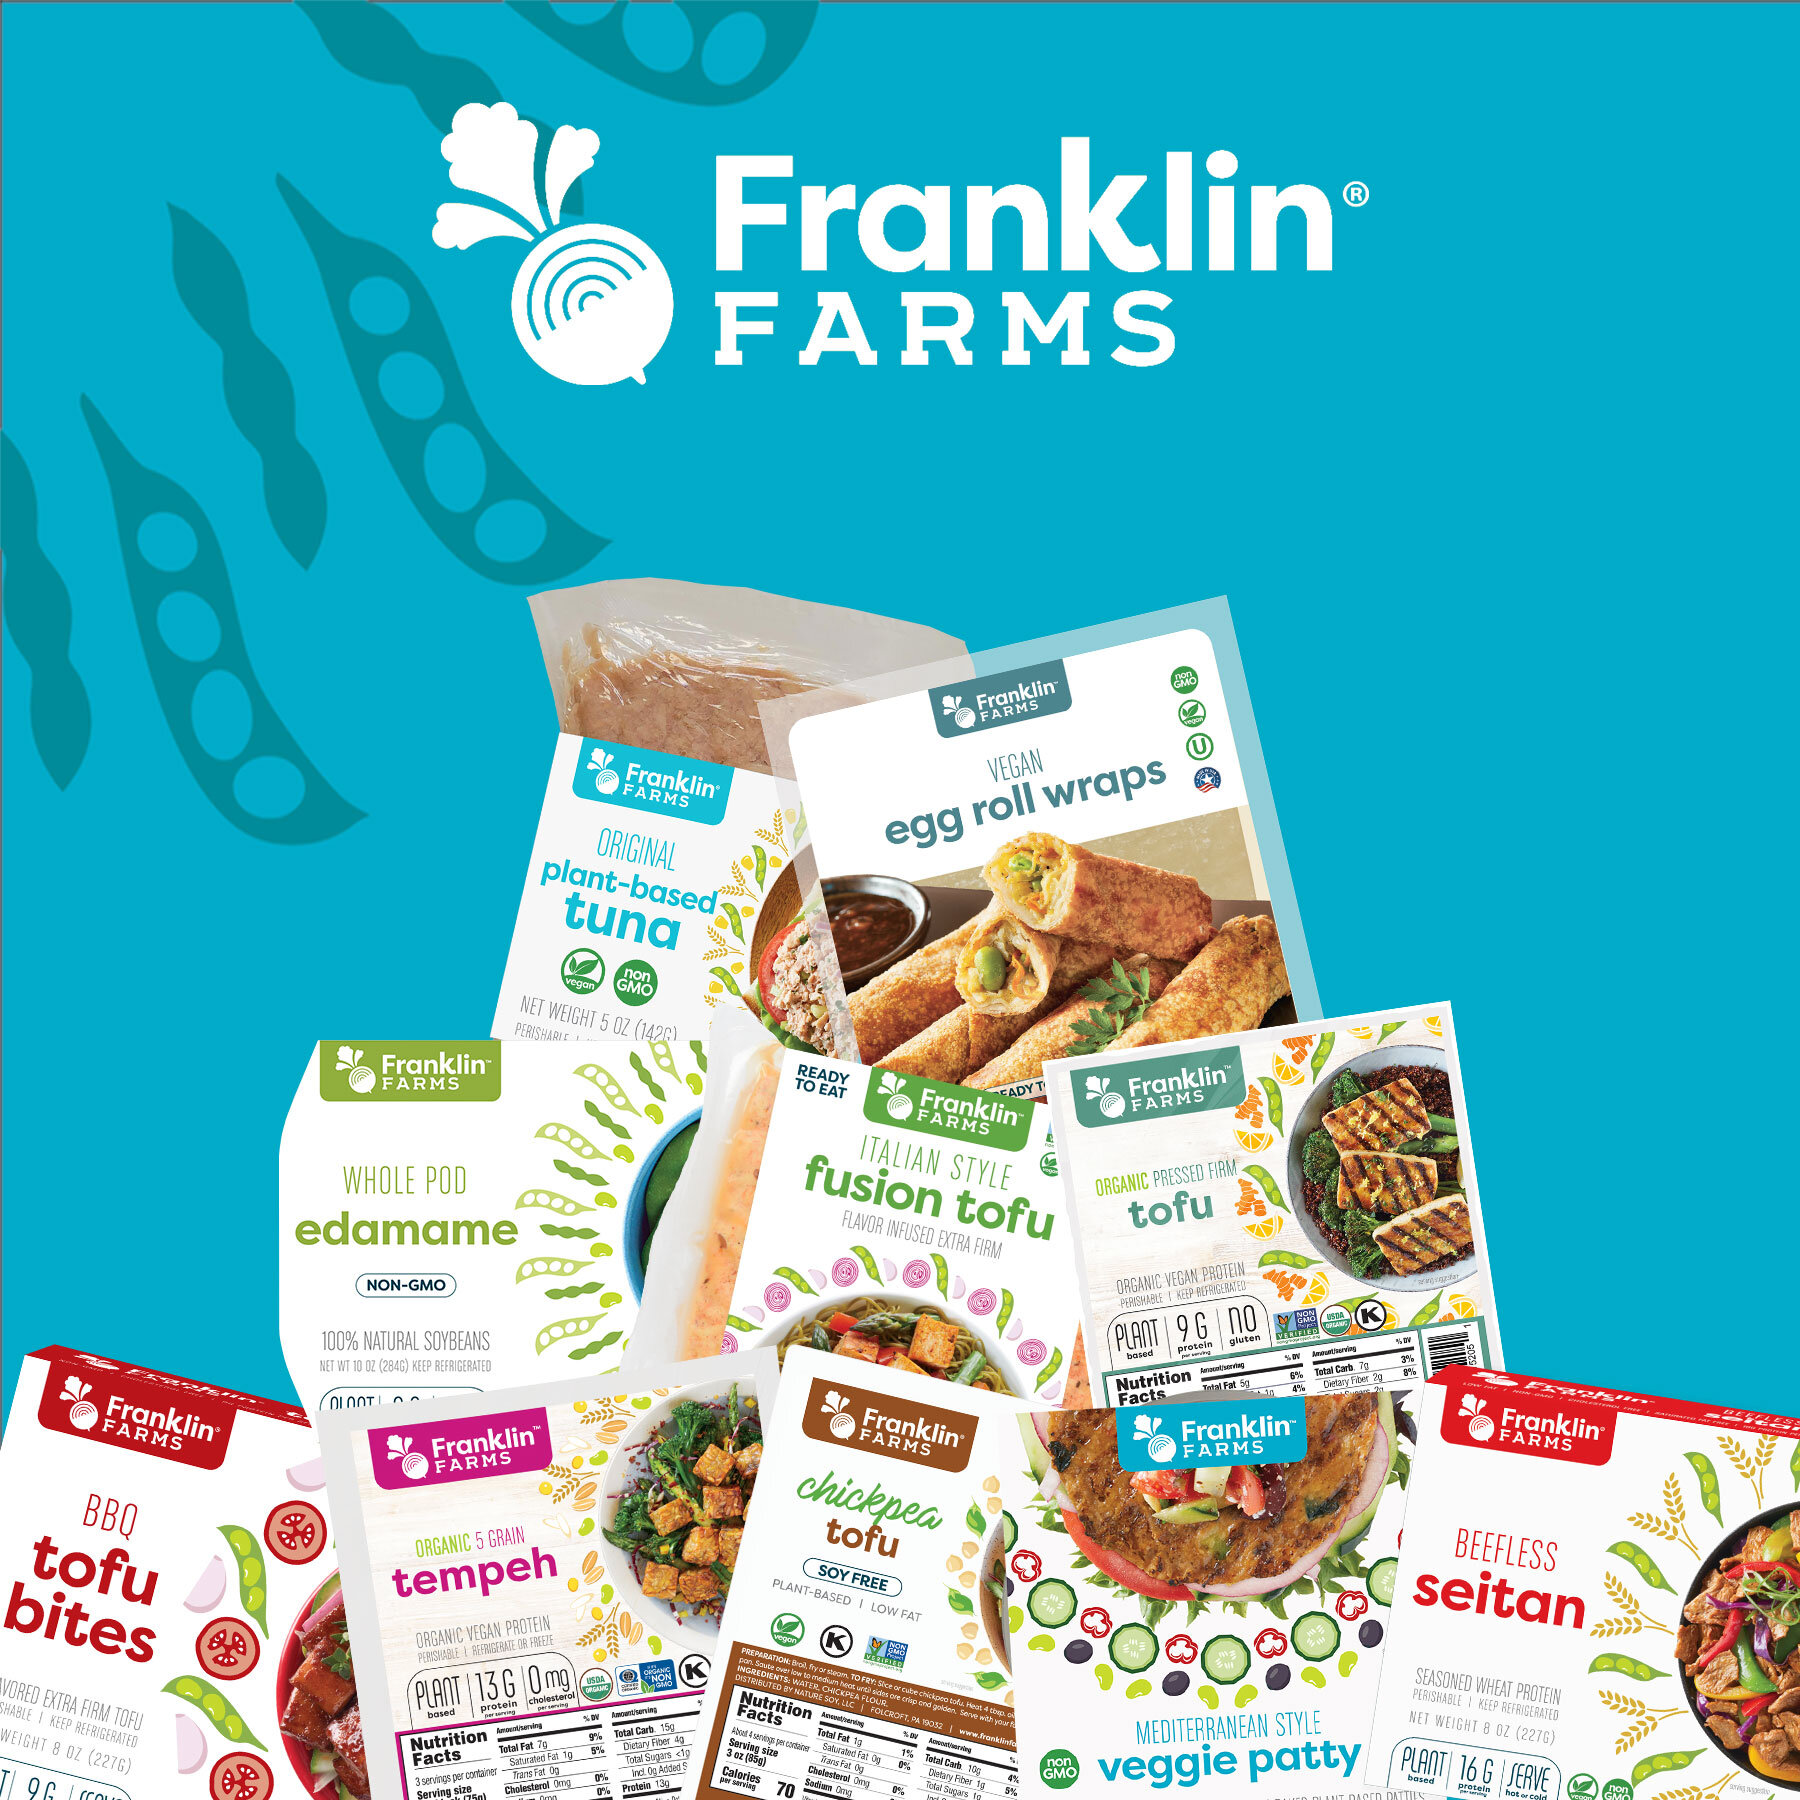 It's a fresh week! Which Franklin Farms products are you stocking up on? 🛒

#FranklinFarms #FranklinFarmsFoods #PlantBased #Vegan #PlantBased #PlantBasedFoods #vegetarian